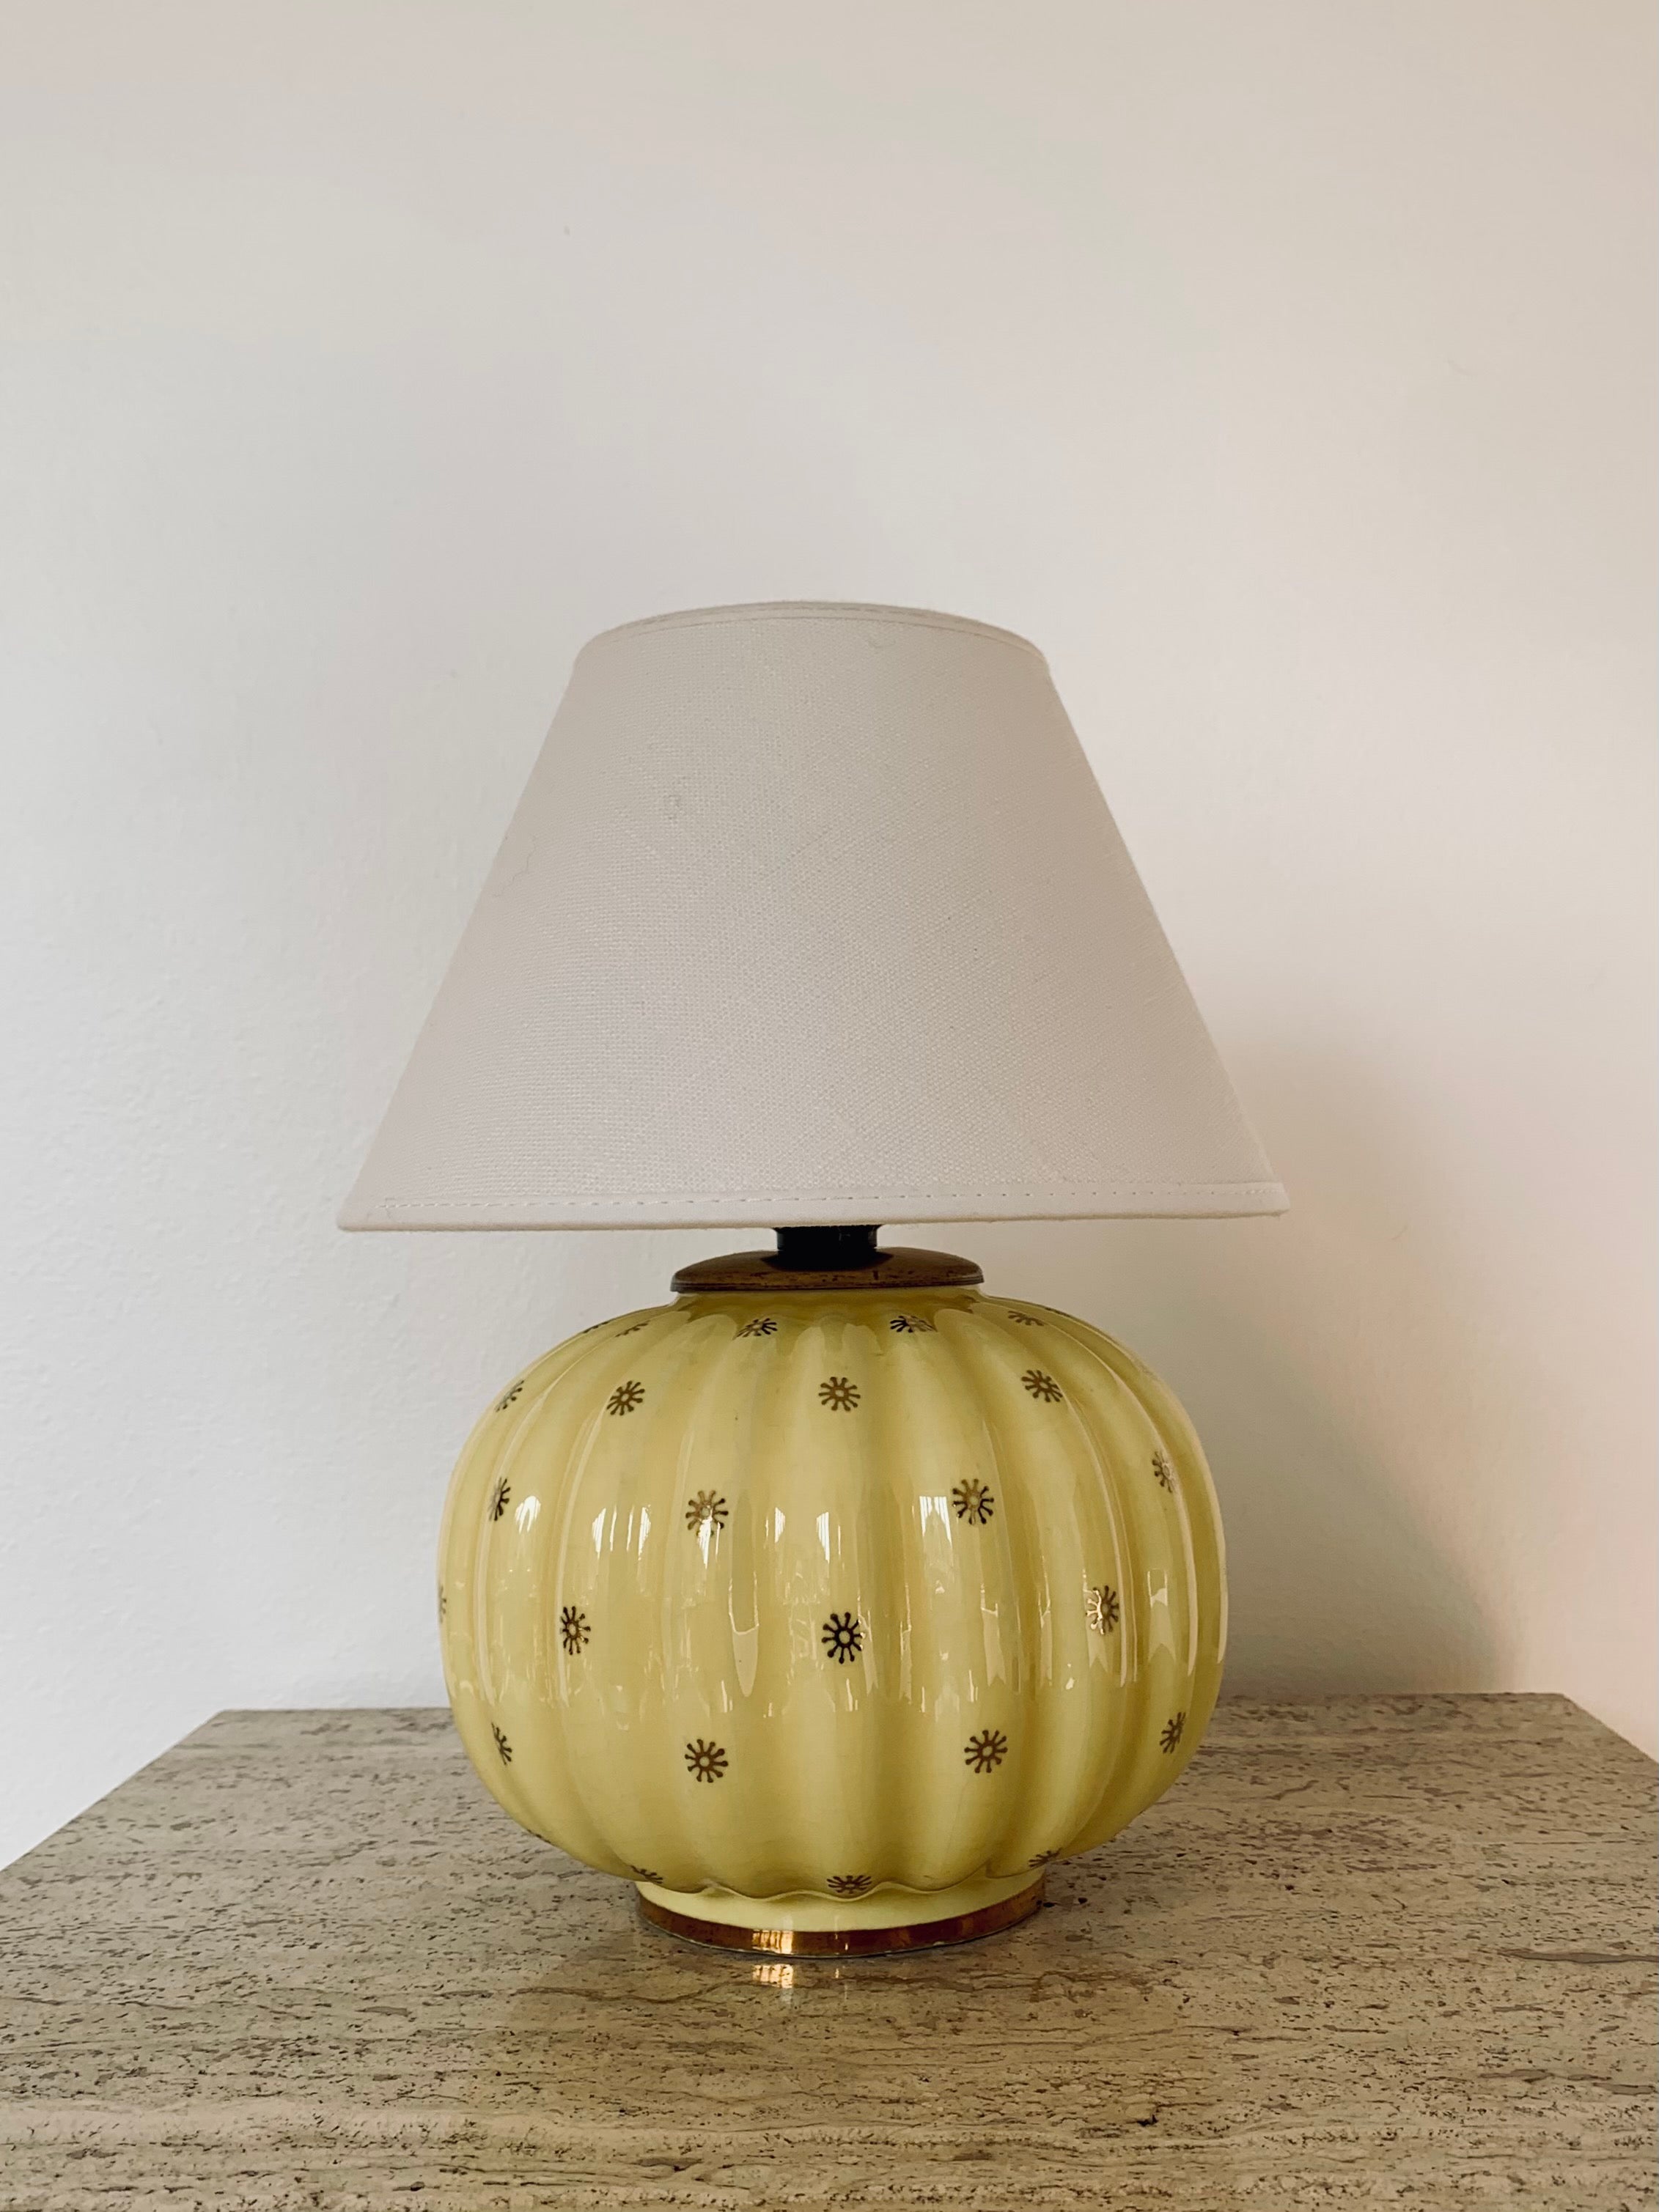 Yellow flint porelain table lamp with gold decor from the 'Neapel' series designed by Arthur Percy for Gefle, Upsala Ekeby, in the 1930s. Round cleft shaped ceramic lampbase with a mild yellow glaze and gilded sun decor. White linnen shade included.